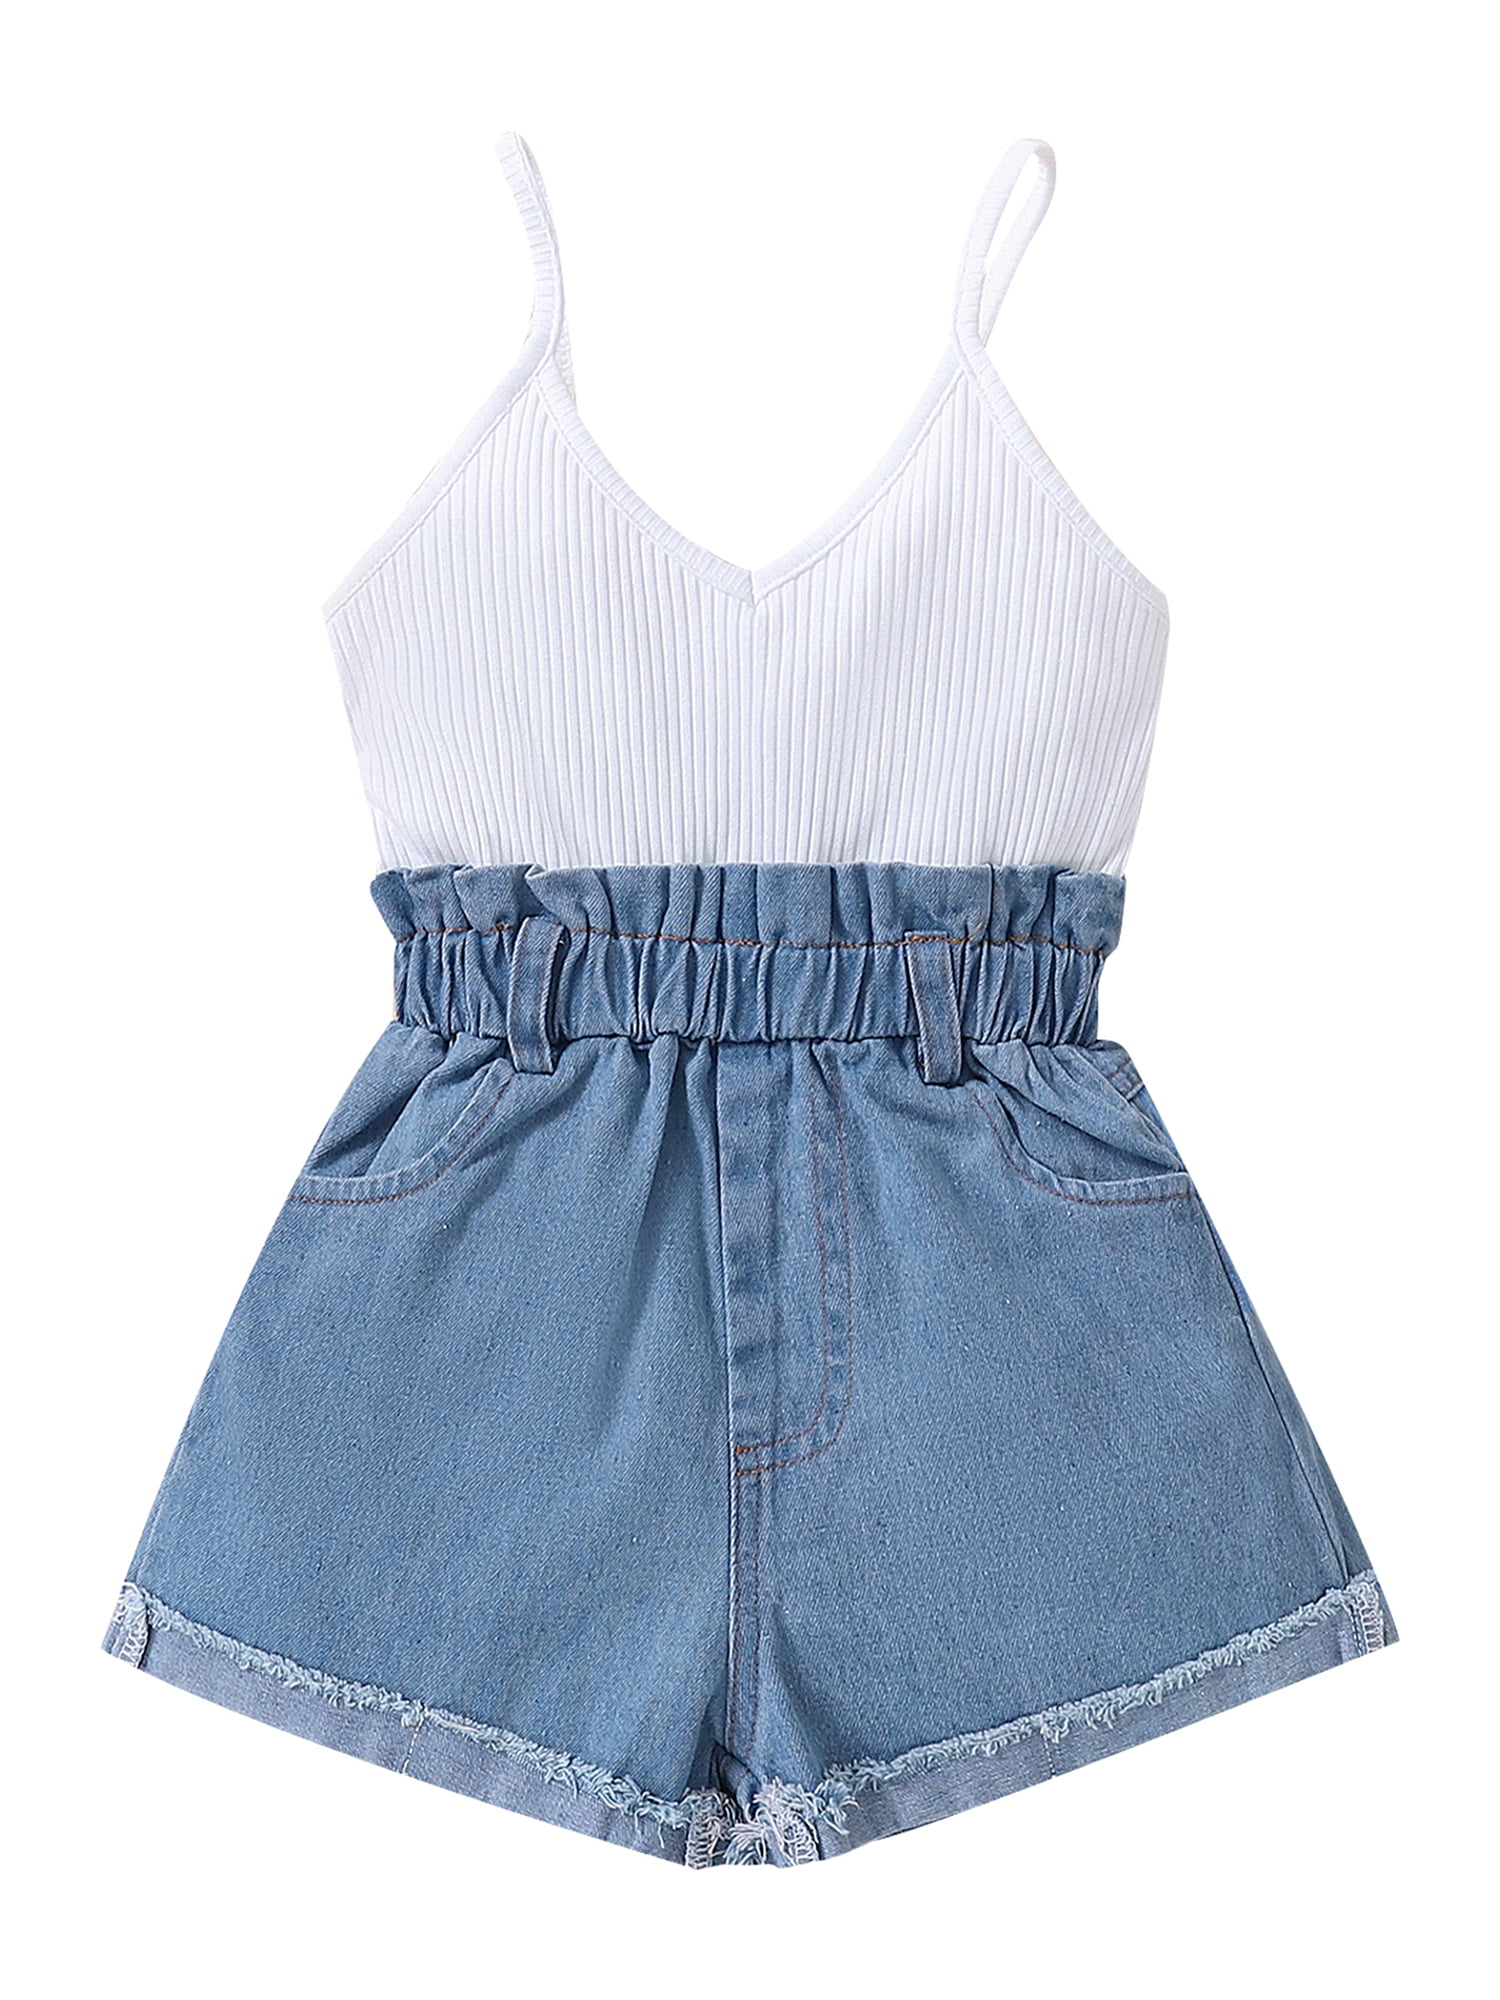 Happy Cherry Baby Toddler Ripped Denim Overalls Jeans Summer Rompers Jumpsuits Adjustable Suspender Shortalls 